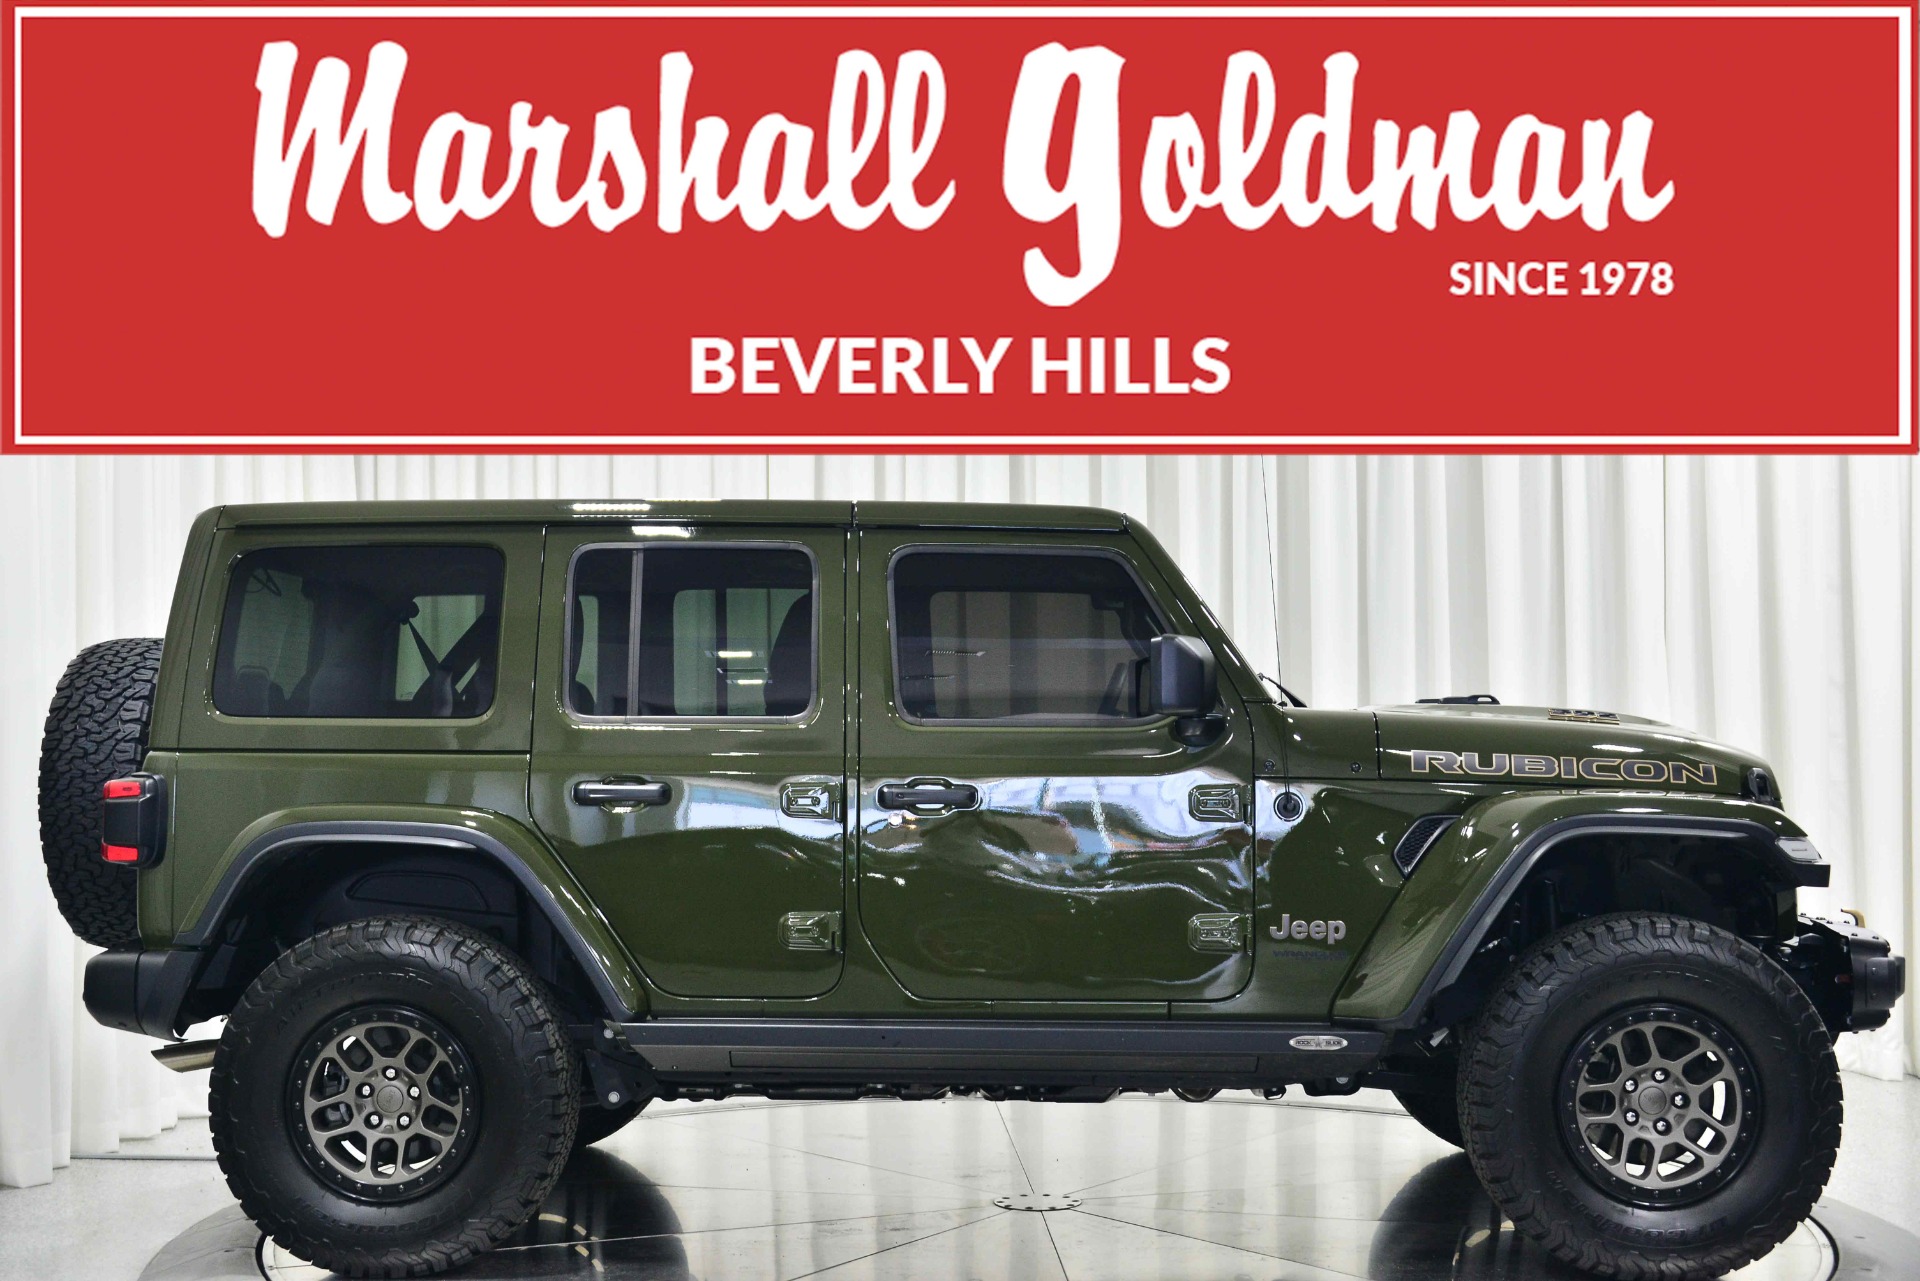 Used 2021 Jeep Wrangler Unlimited Rubicon 392 For Sale (Sold) | Marshall  Goldman Beverly Hills Stock #B23941